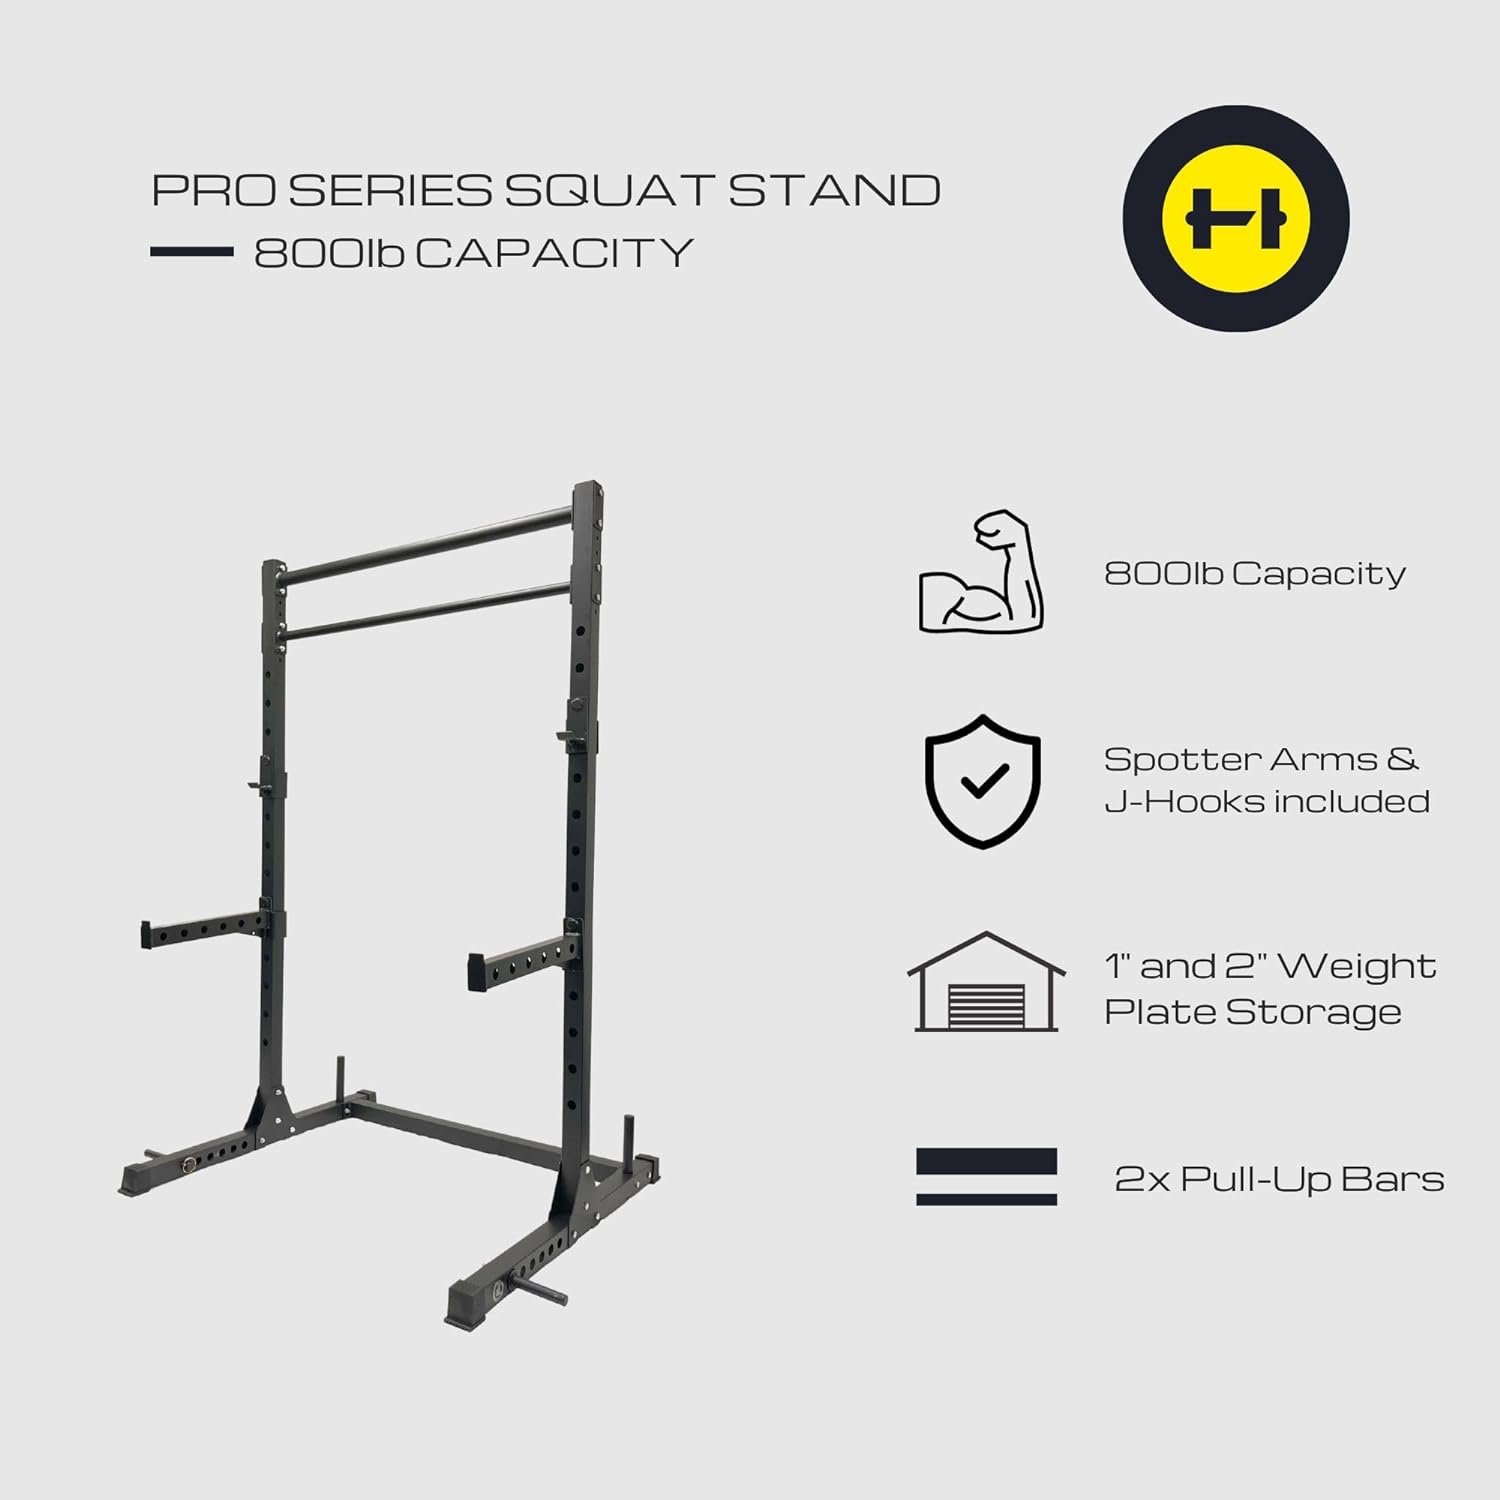 HulkFit Squat Stand Power Cage Strength Training Exercise Equipment Review